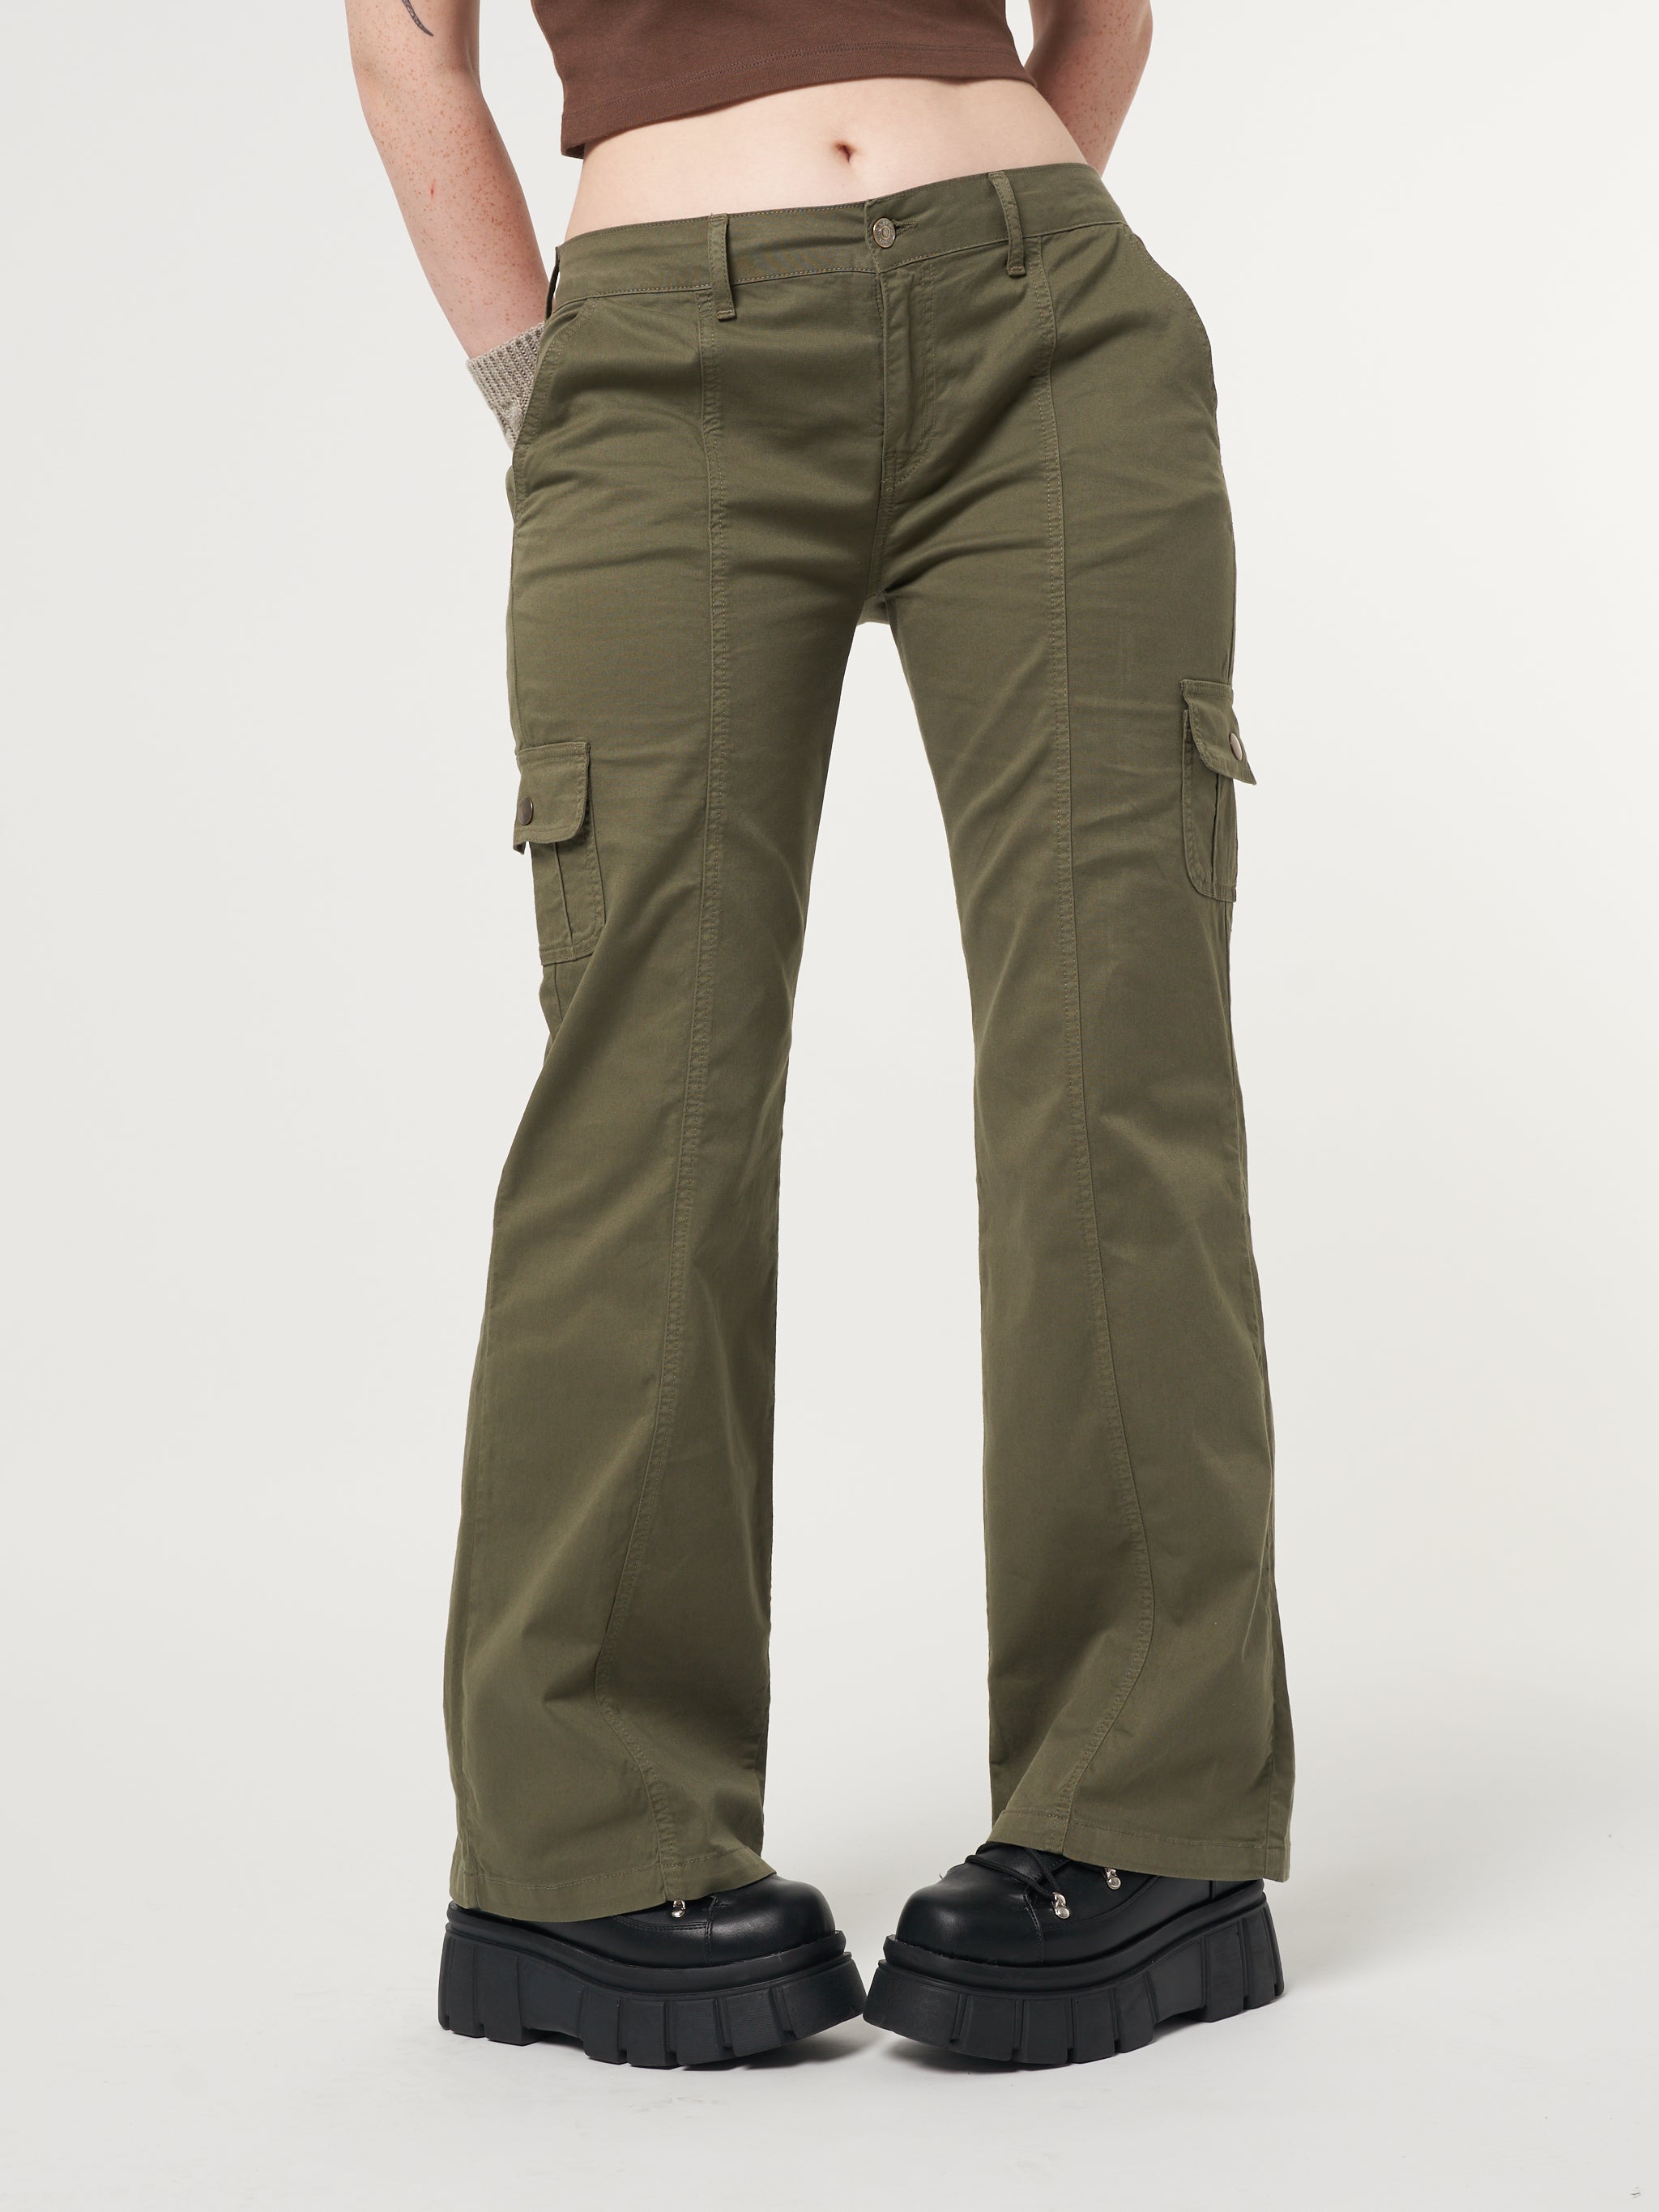 Low rise cargo pants in olive green featuring flared legs